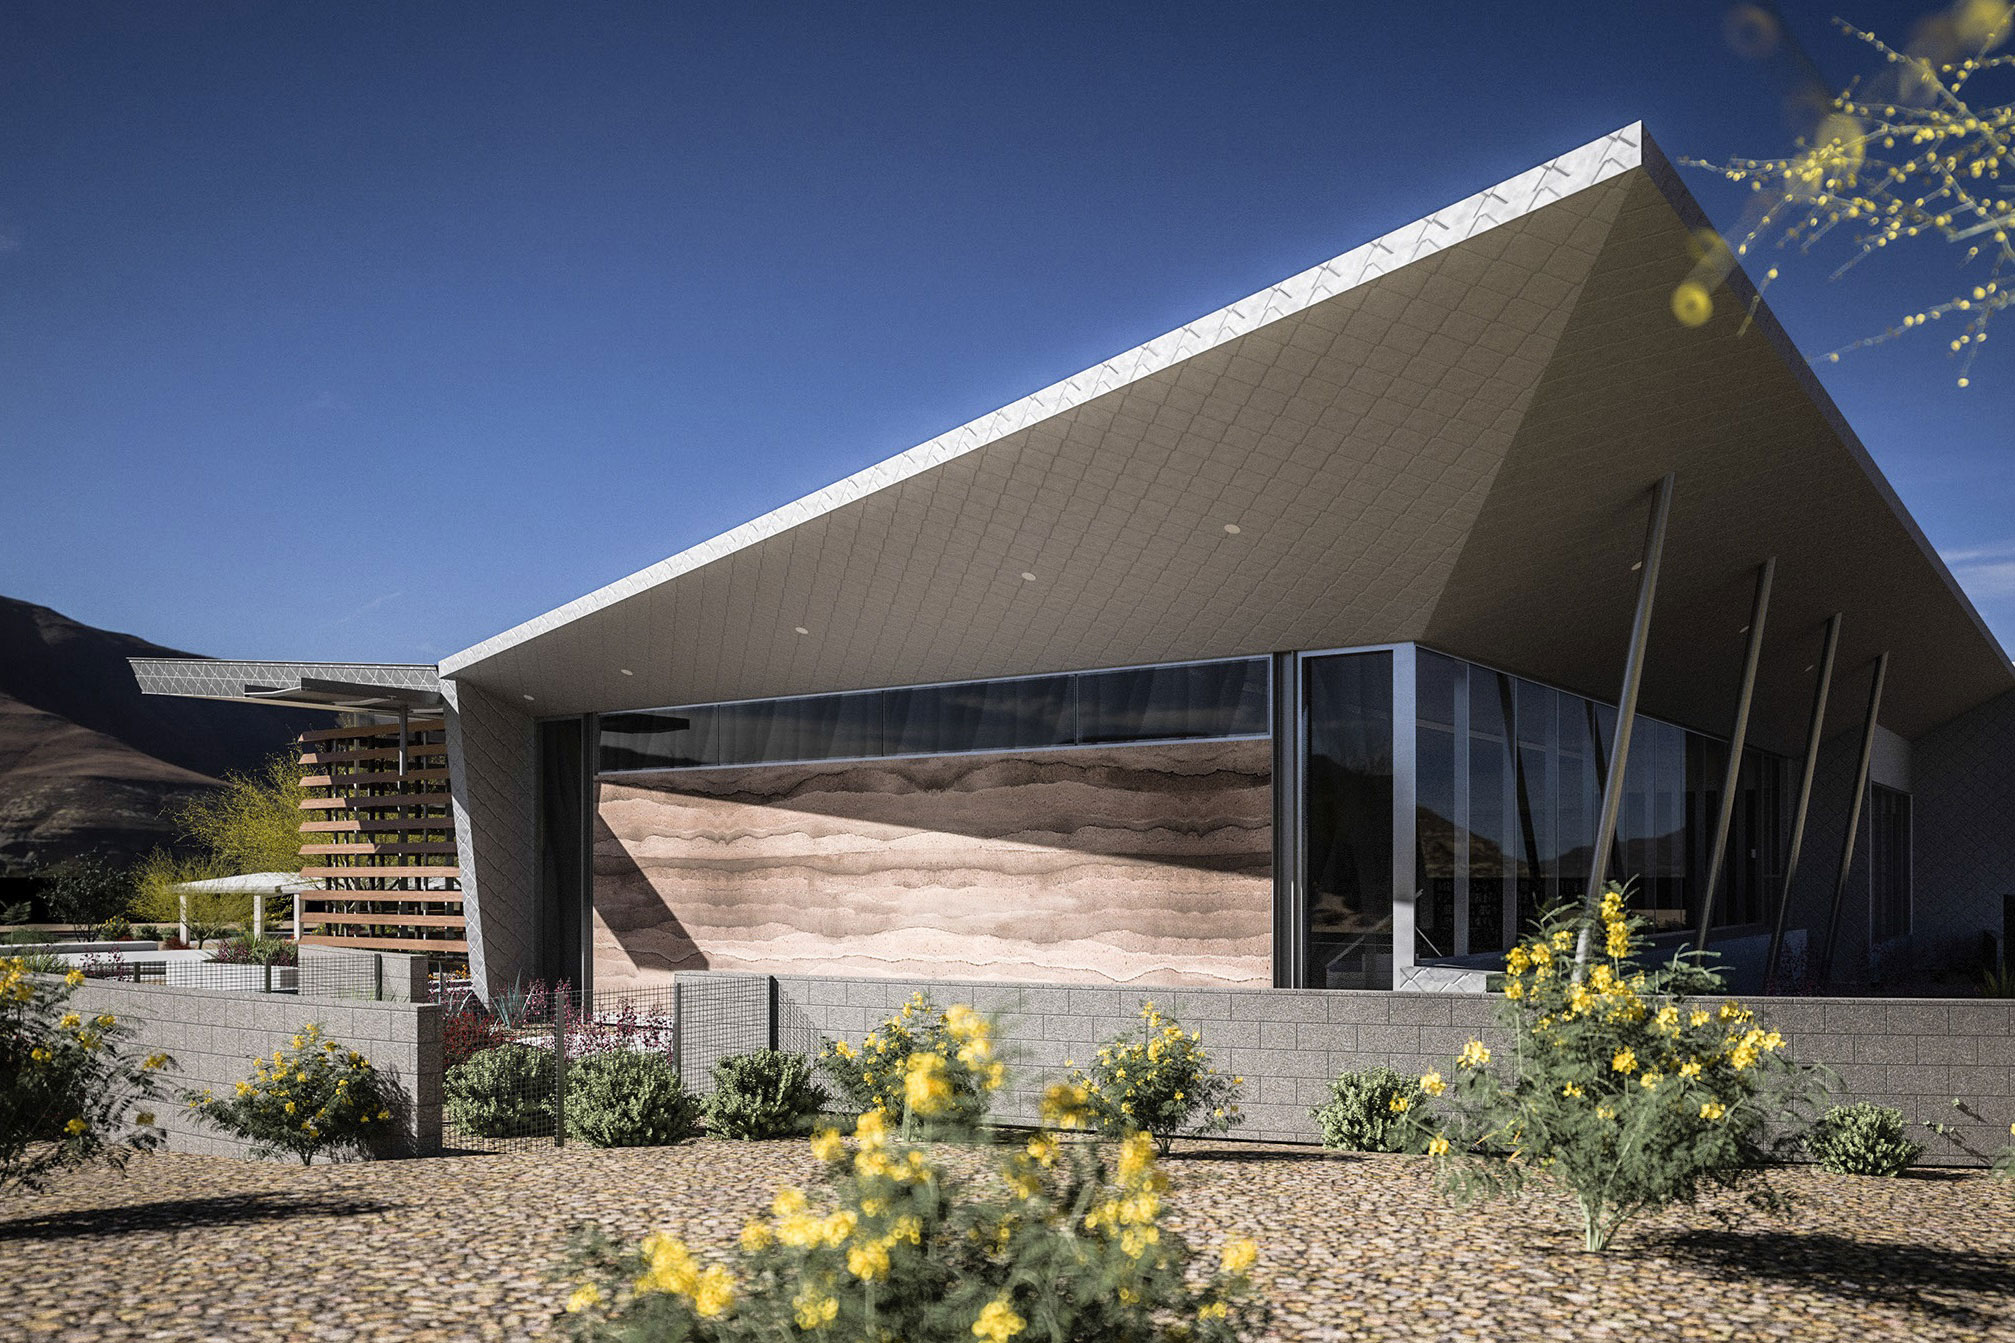 Orcutt Winslow Architects on Designing Sustainably in the Sonoran Desert